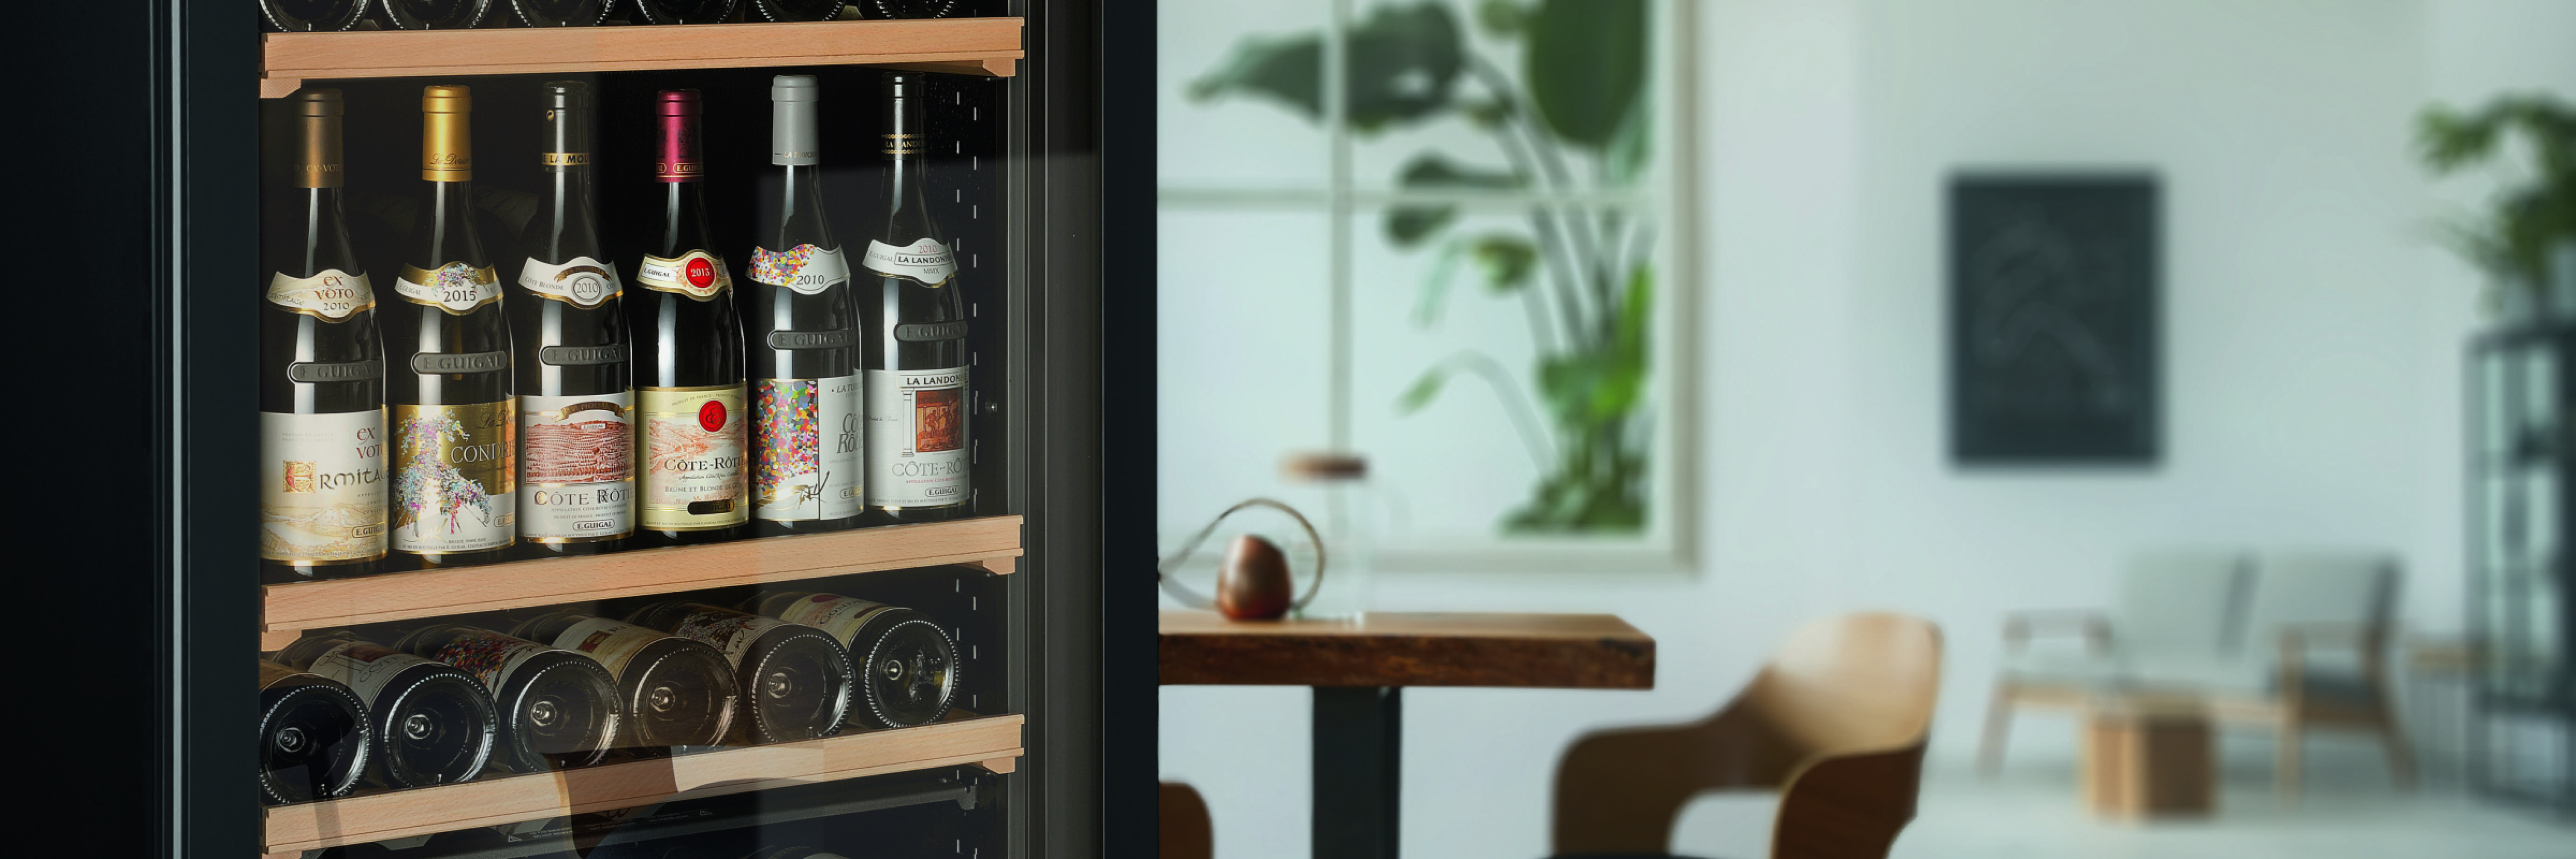 Is it possible to store wine in a fridge?